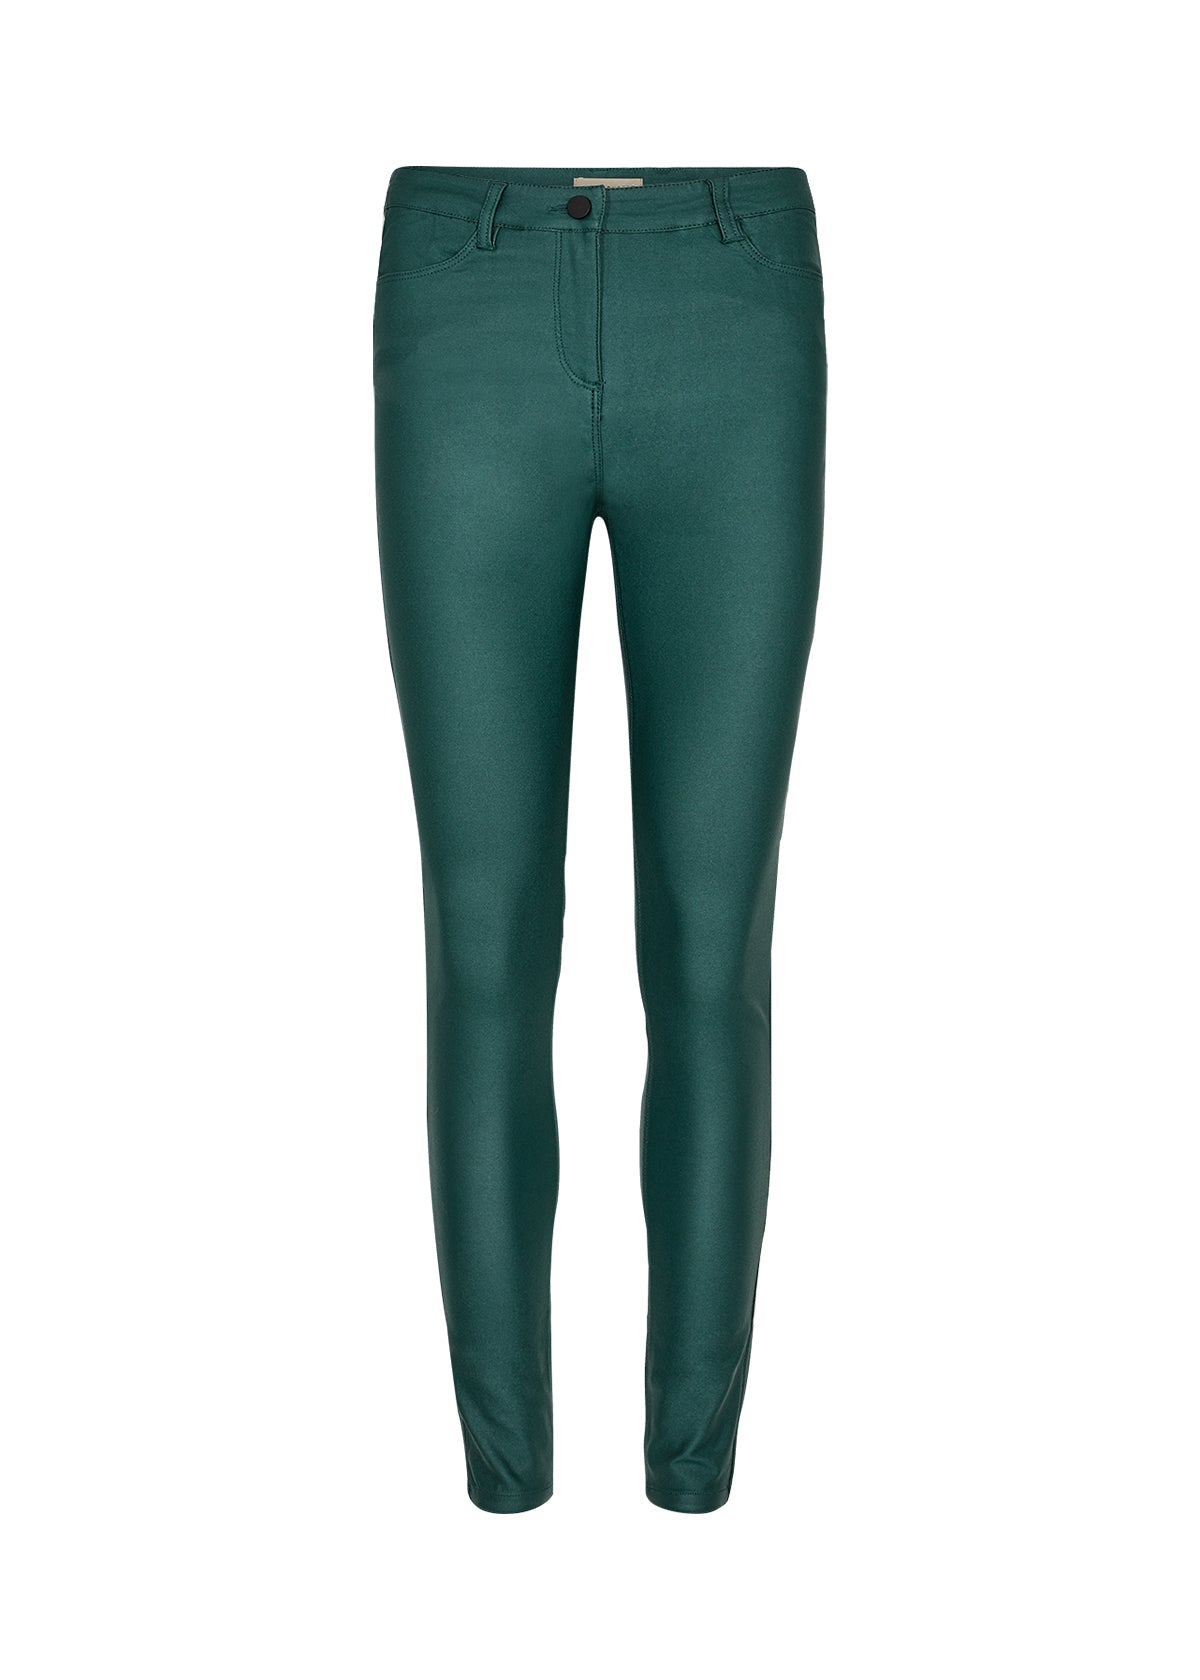 Soya Concept Pam Green Trousers